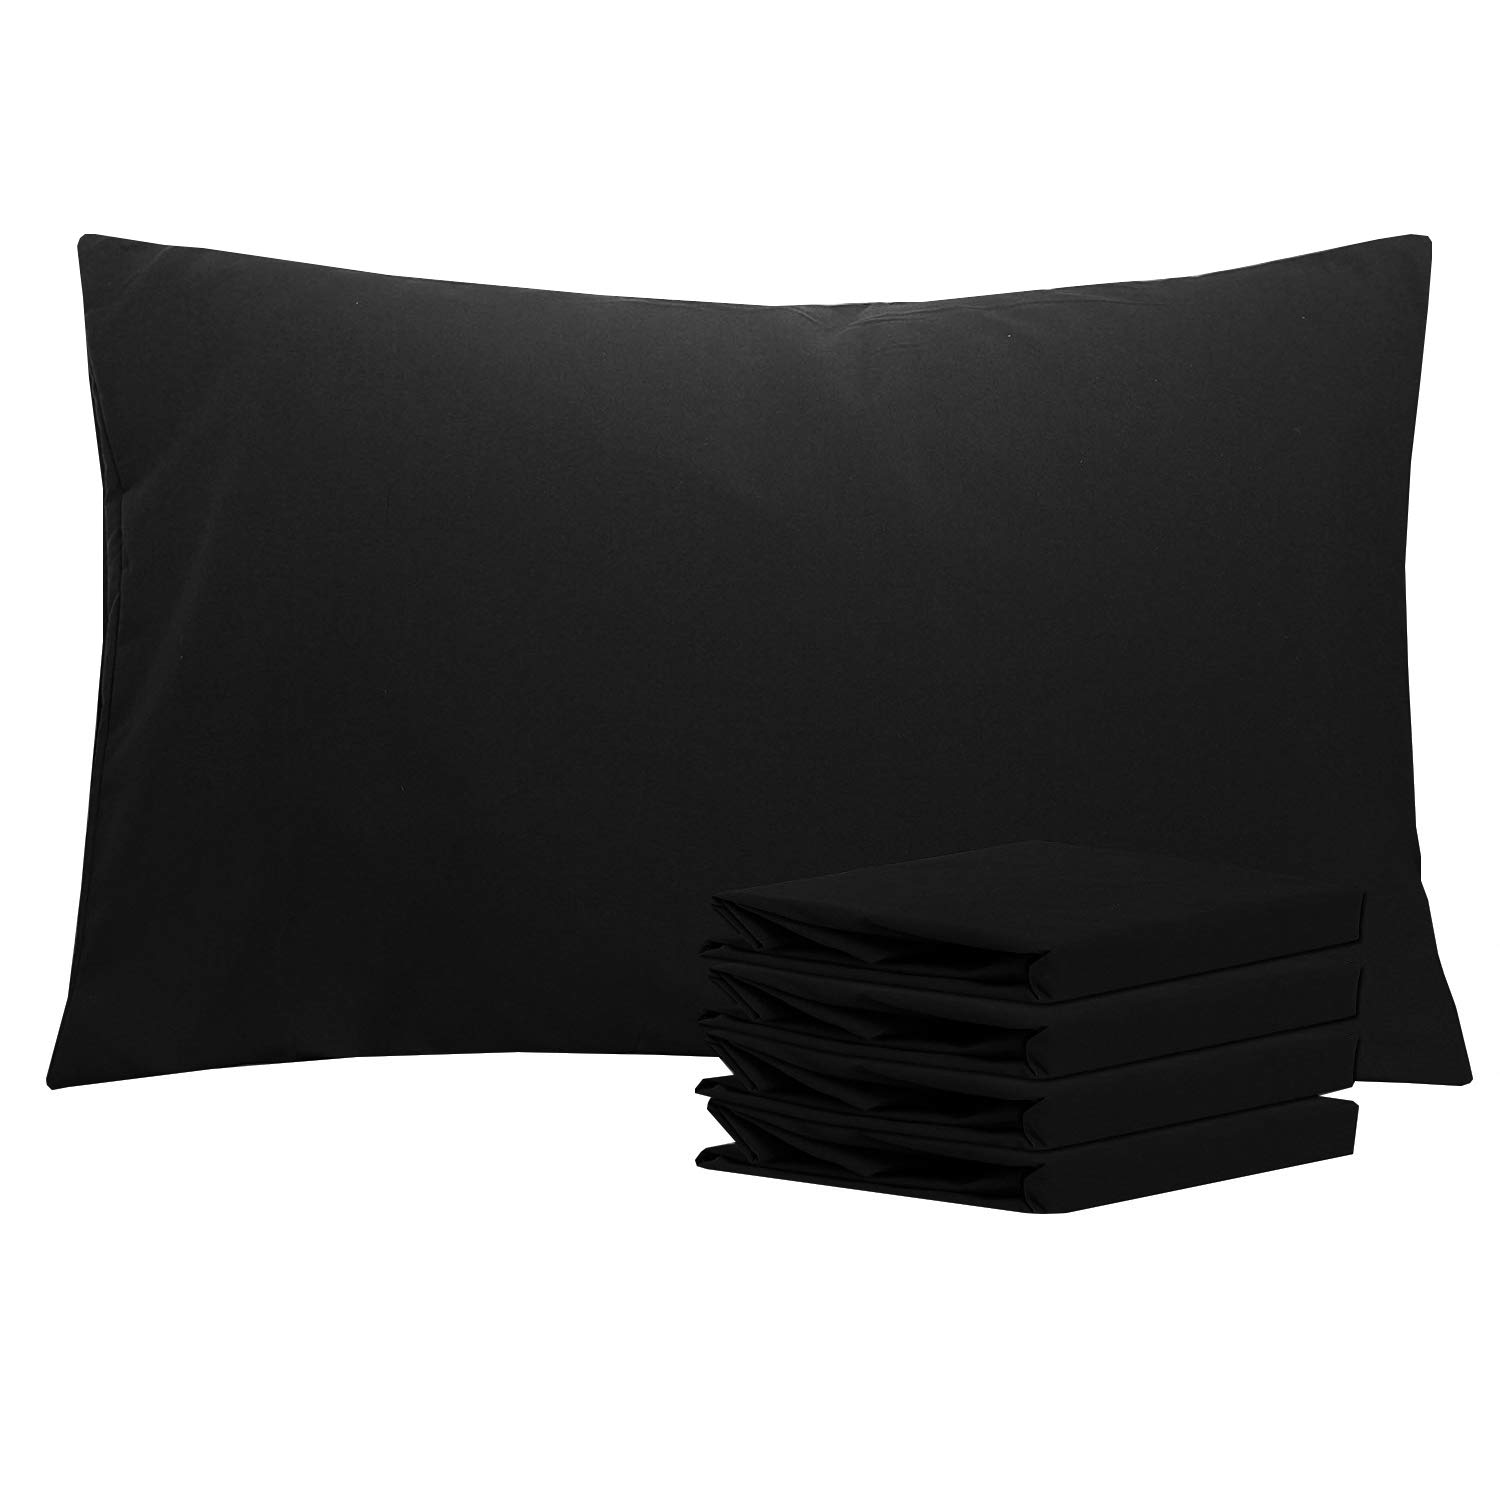 Book Cover NTBAY 100% Brushed Microfiber Queen Pillowcases Set of 4, 1800 Super Soft and Cozy, Wrinkle, Fade, Stain Resistant with Envelope Closure Bed Pillow Cases, 20x30 Inches, Black Black Queen (20